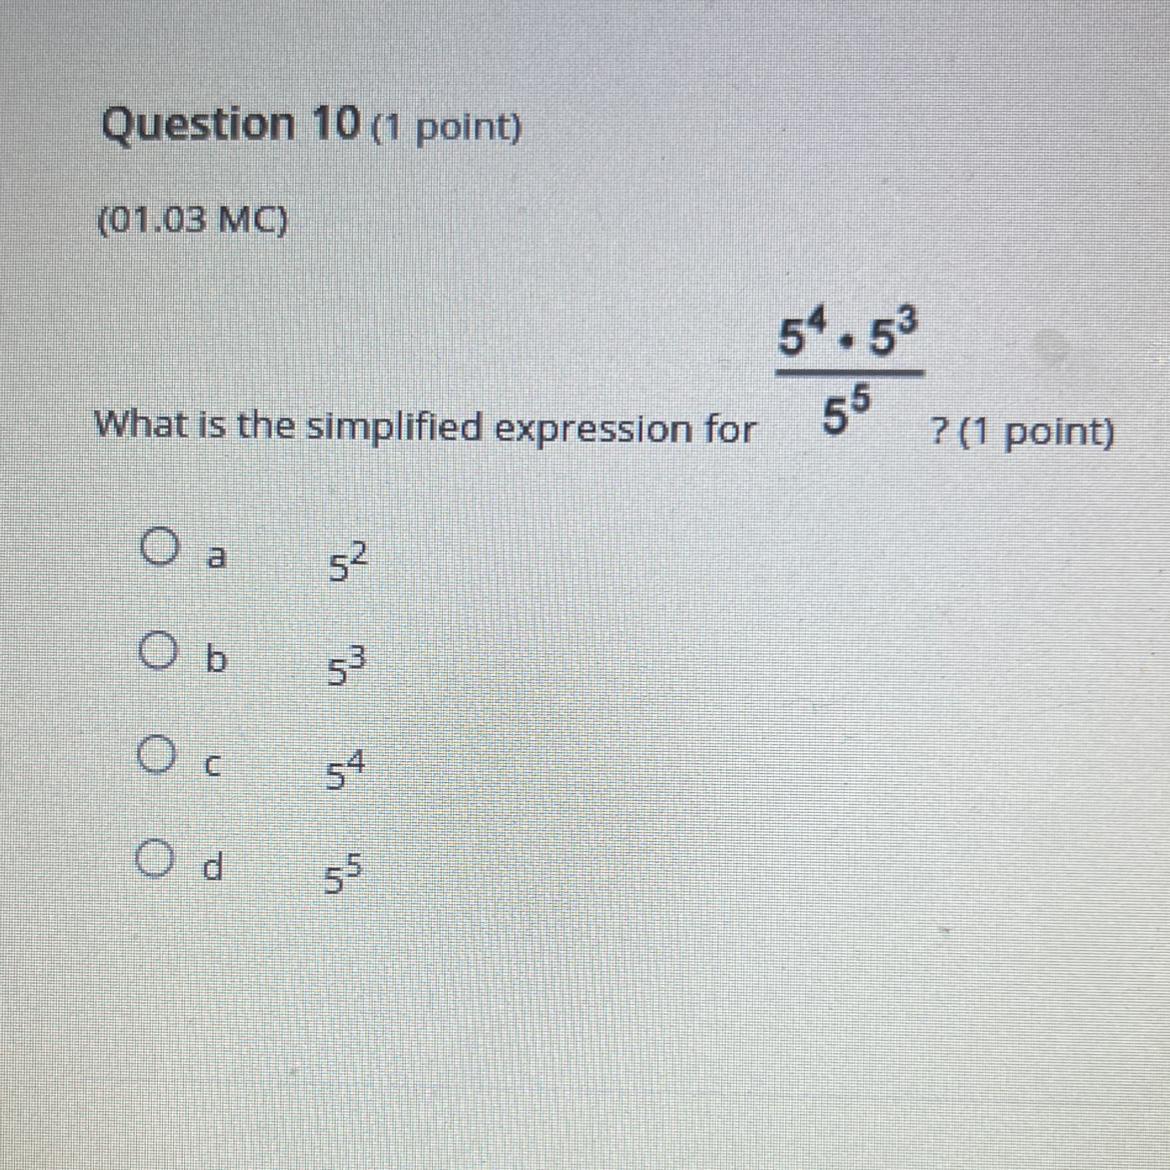 Question 10 (1 Point)(01.03 MC)What Is The Simplified Expression For 54.53 55? 5535455